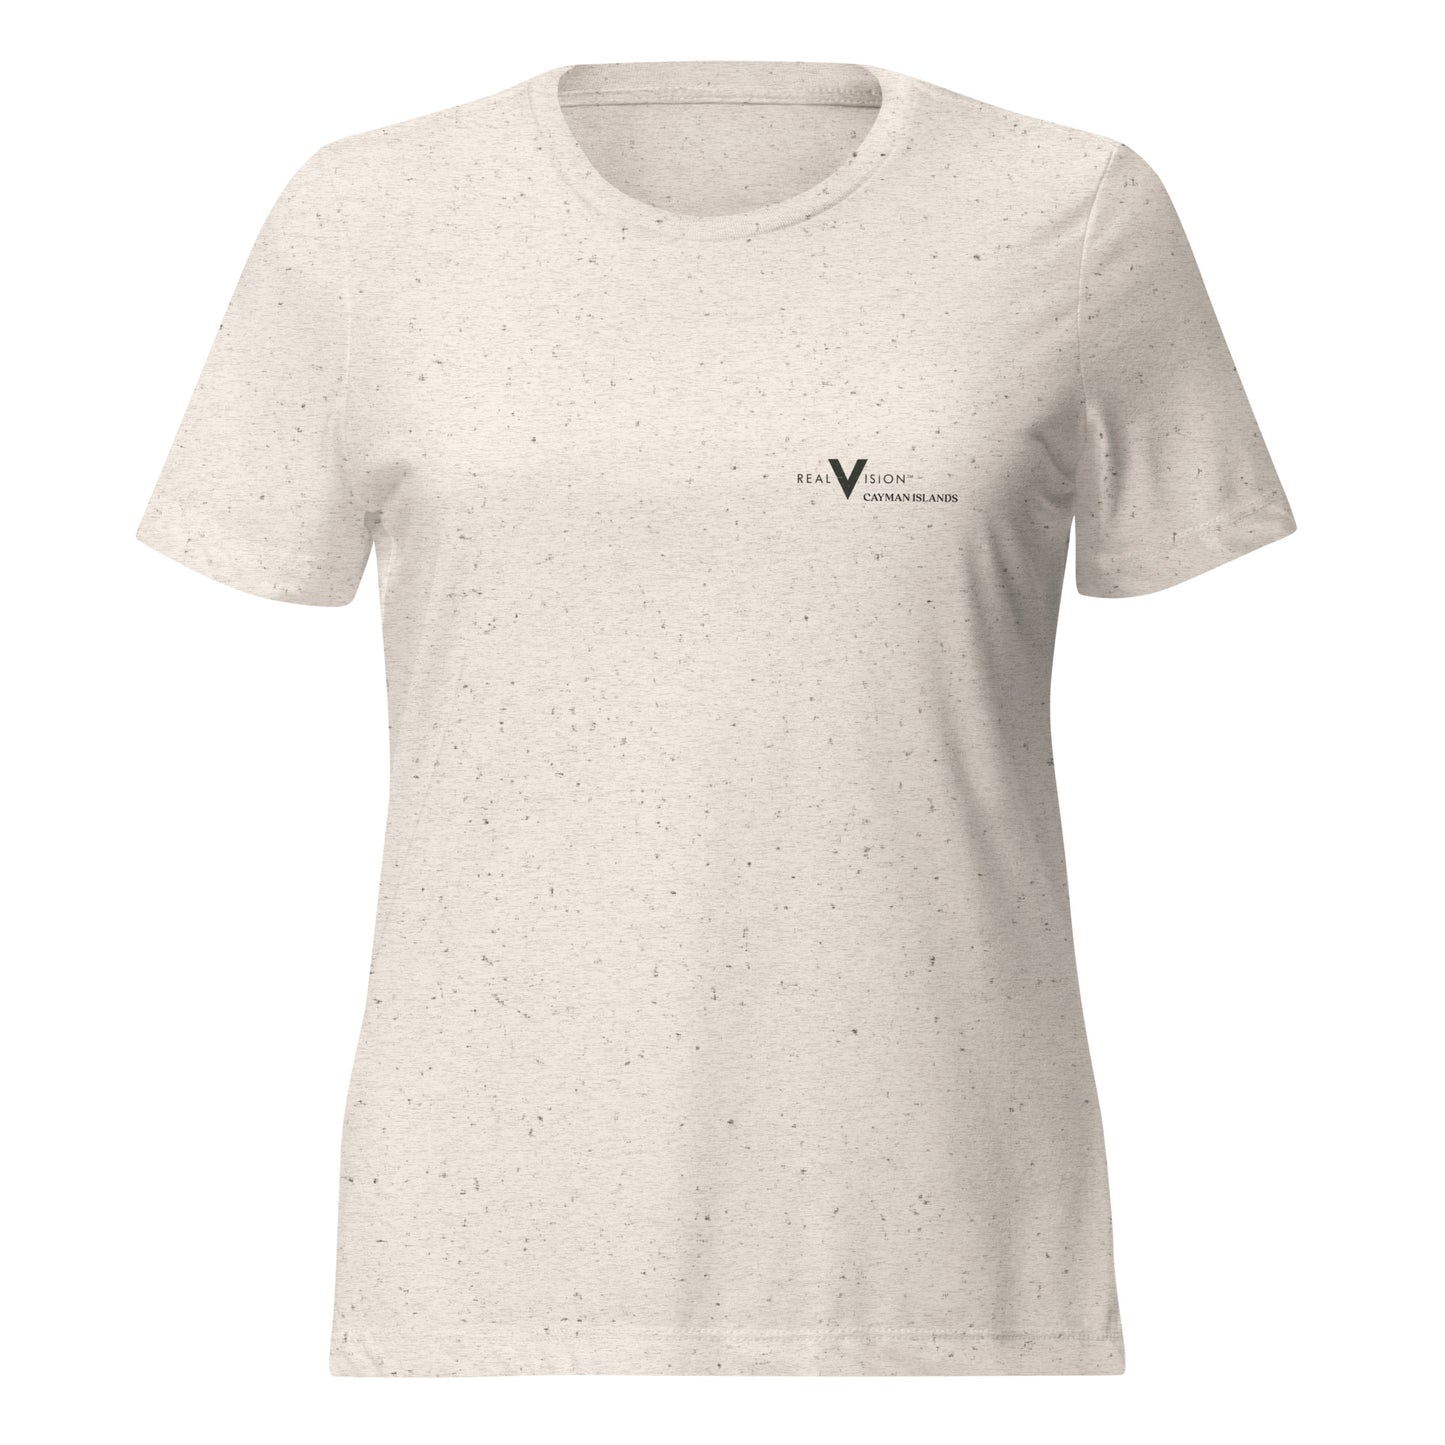 Real Vision Cayman Islands Women's Tee